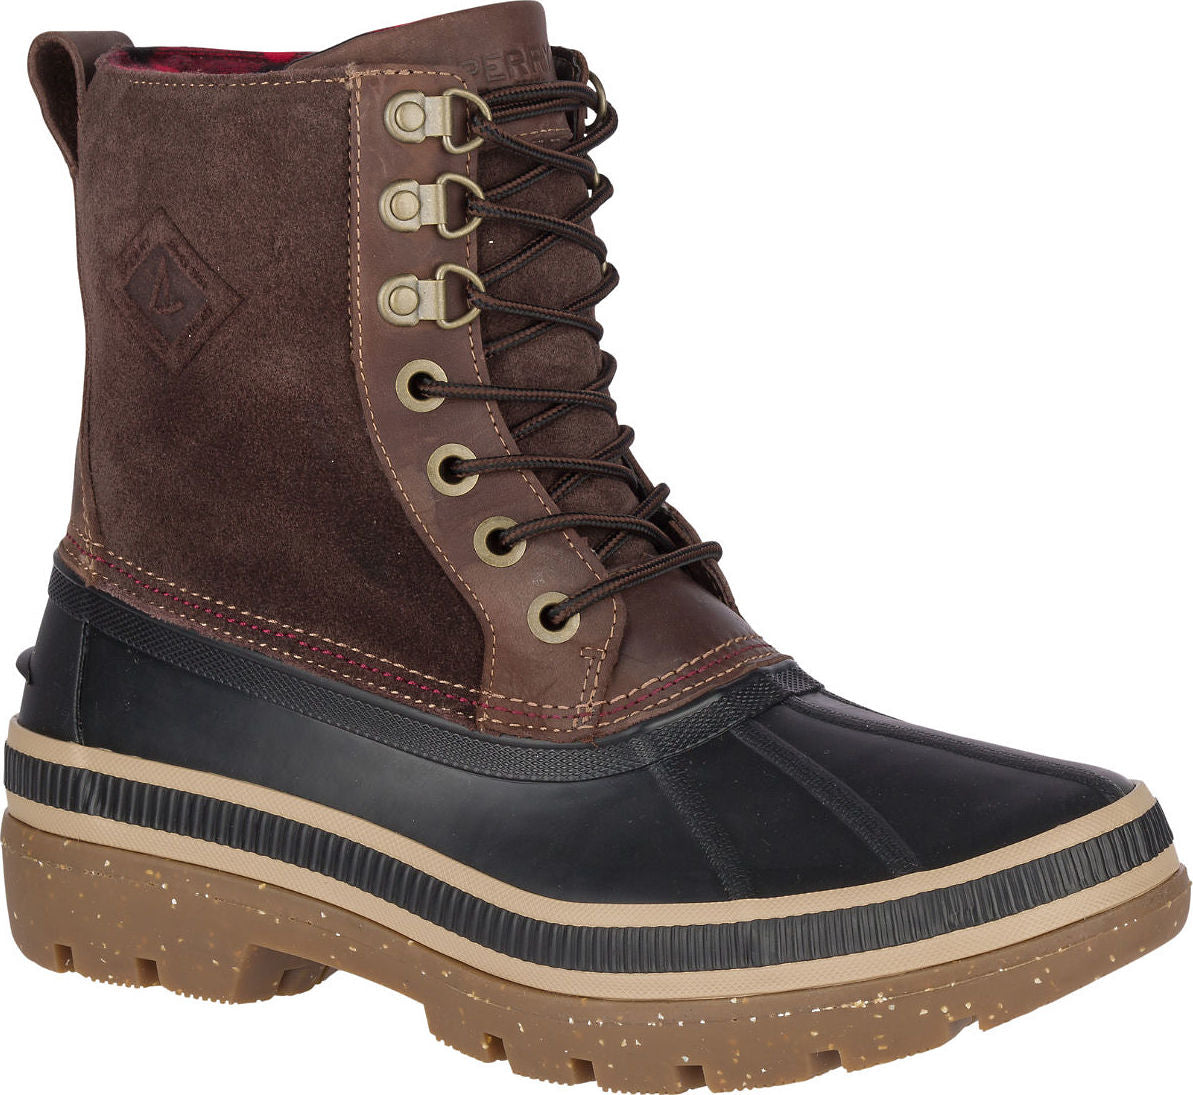 Sperry Top Sider Ice Bay Boots - Men's | The Last Hunt